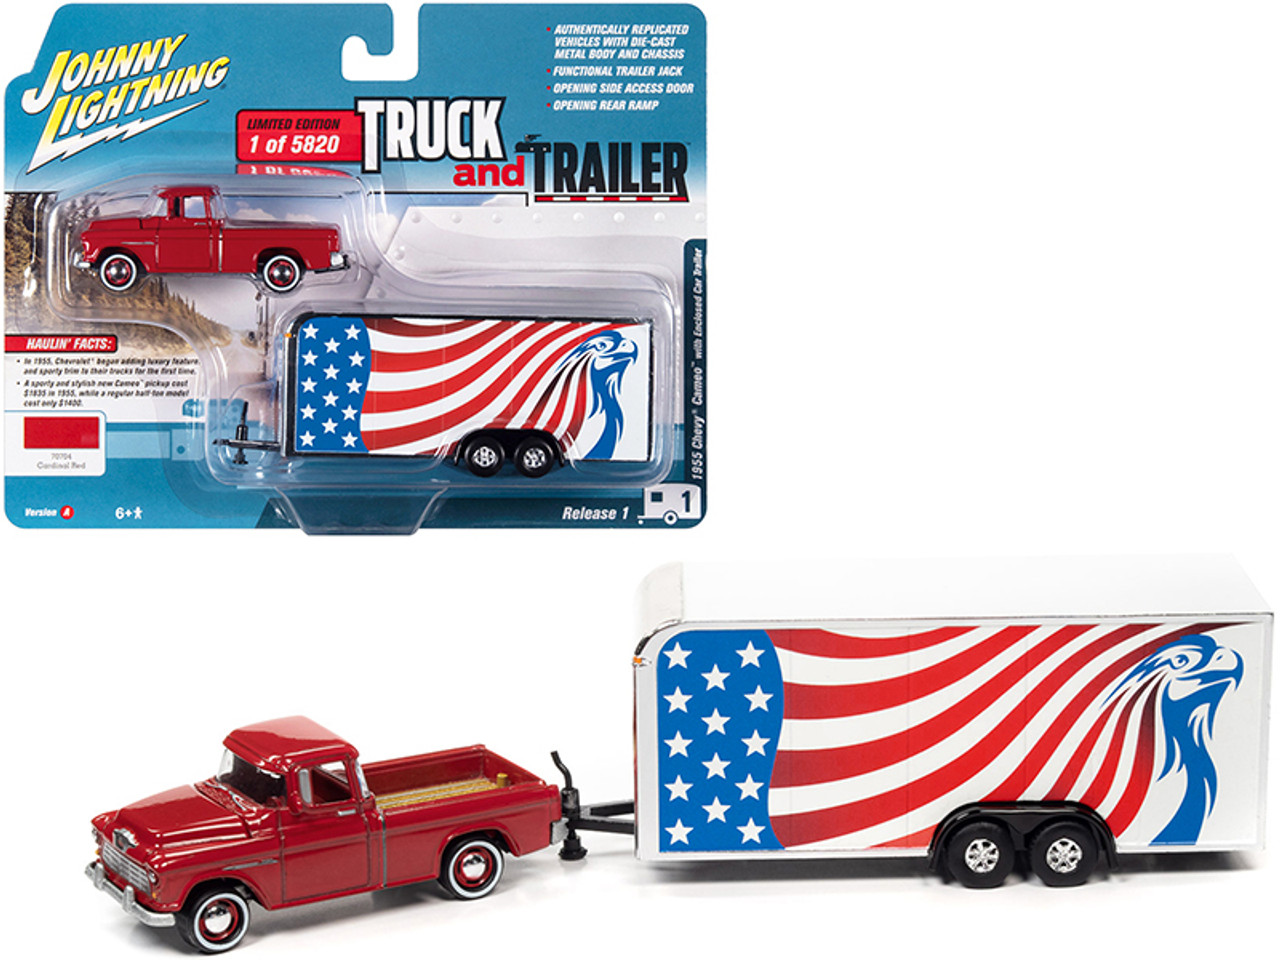 1955 Chevrolet Cameo Pickup Truck Cardinal Red with Enclosed Car Trailer with American Flag Graphics Limited Edition to 5820 pieces Worldwide "Truck and Trailer" Series 1/64 Diecast Model Car by Johnny Lightning